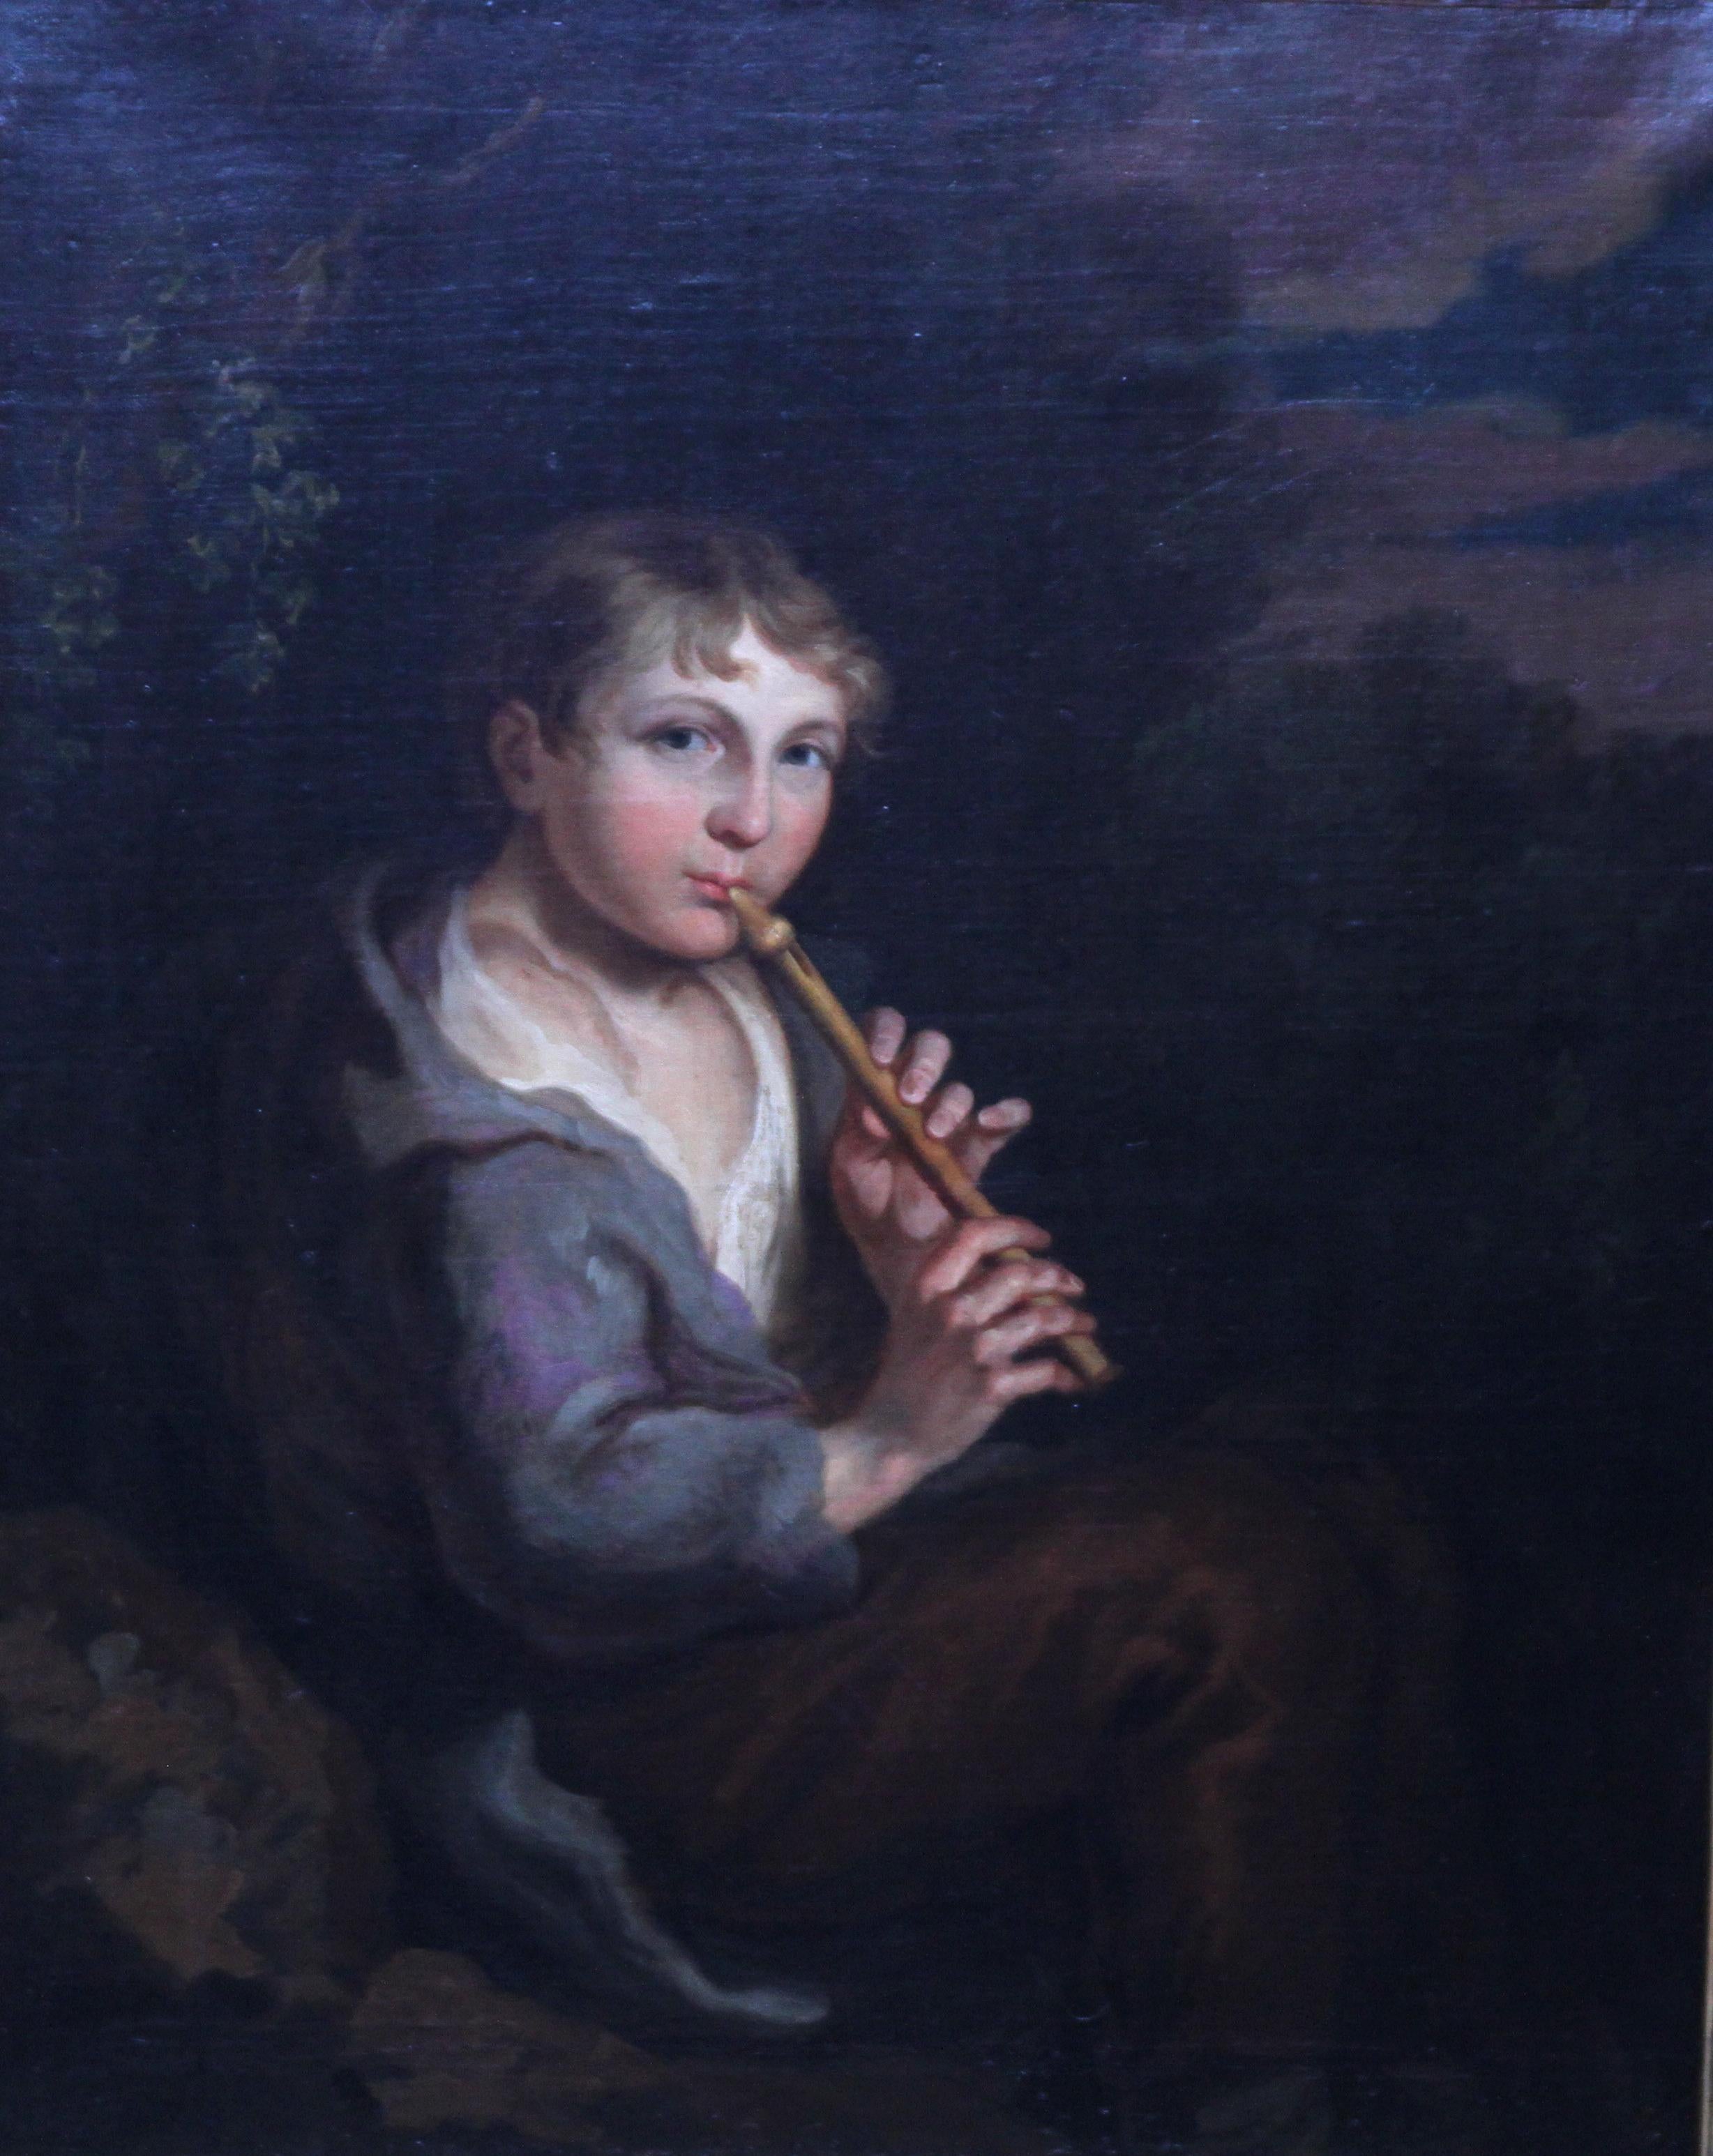 Portrait of Boy Playing a Flute - 18th/19th century art Old Master oil painting  For Sale 1